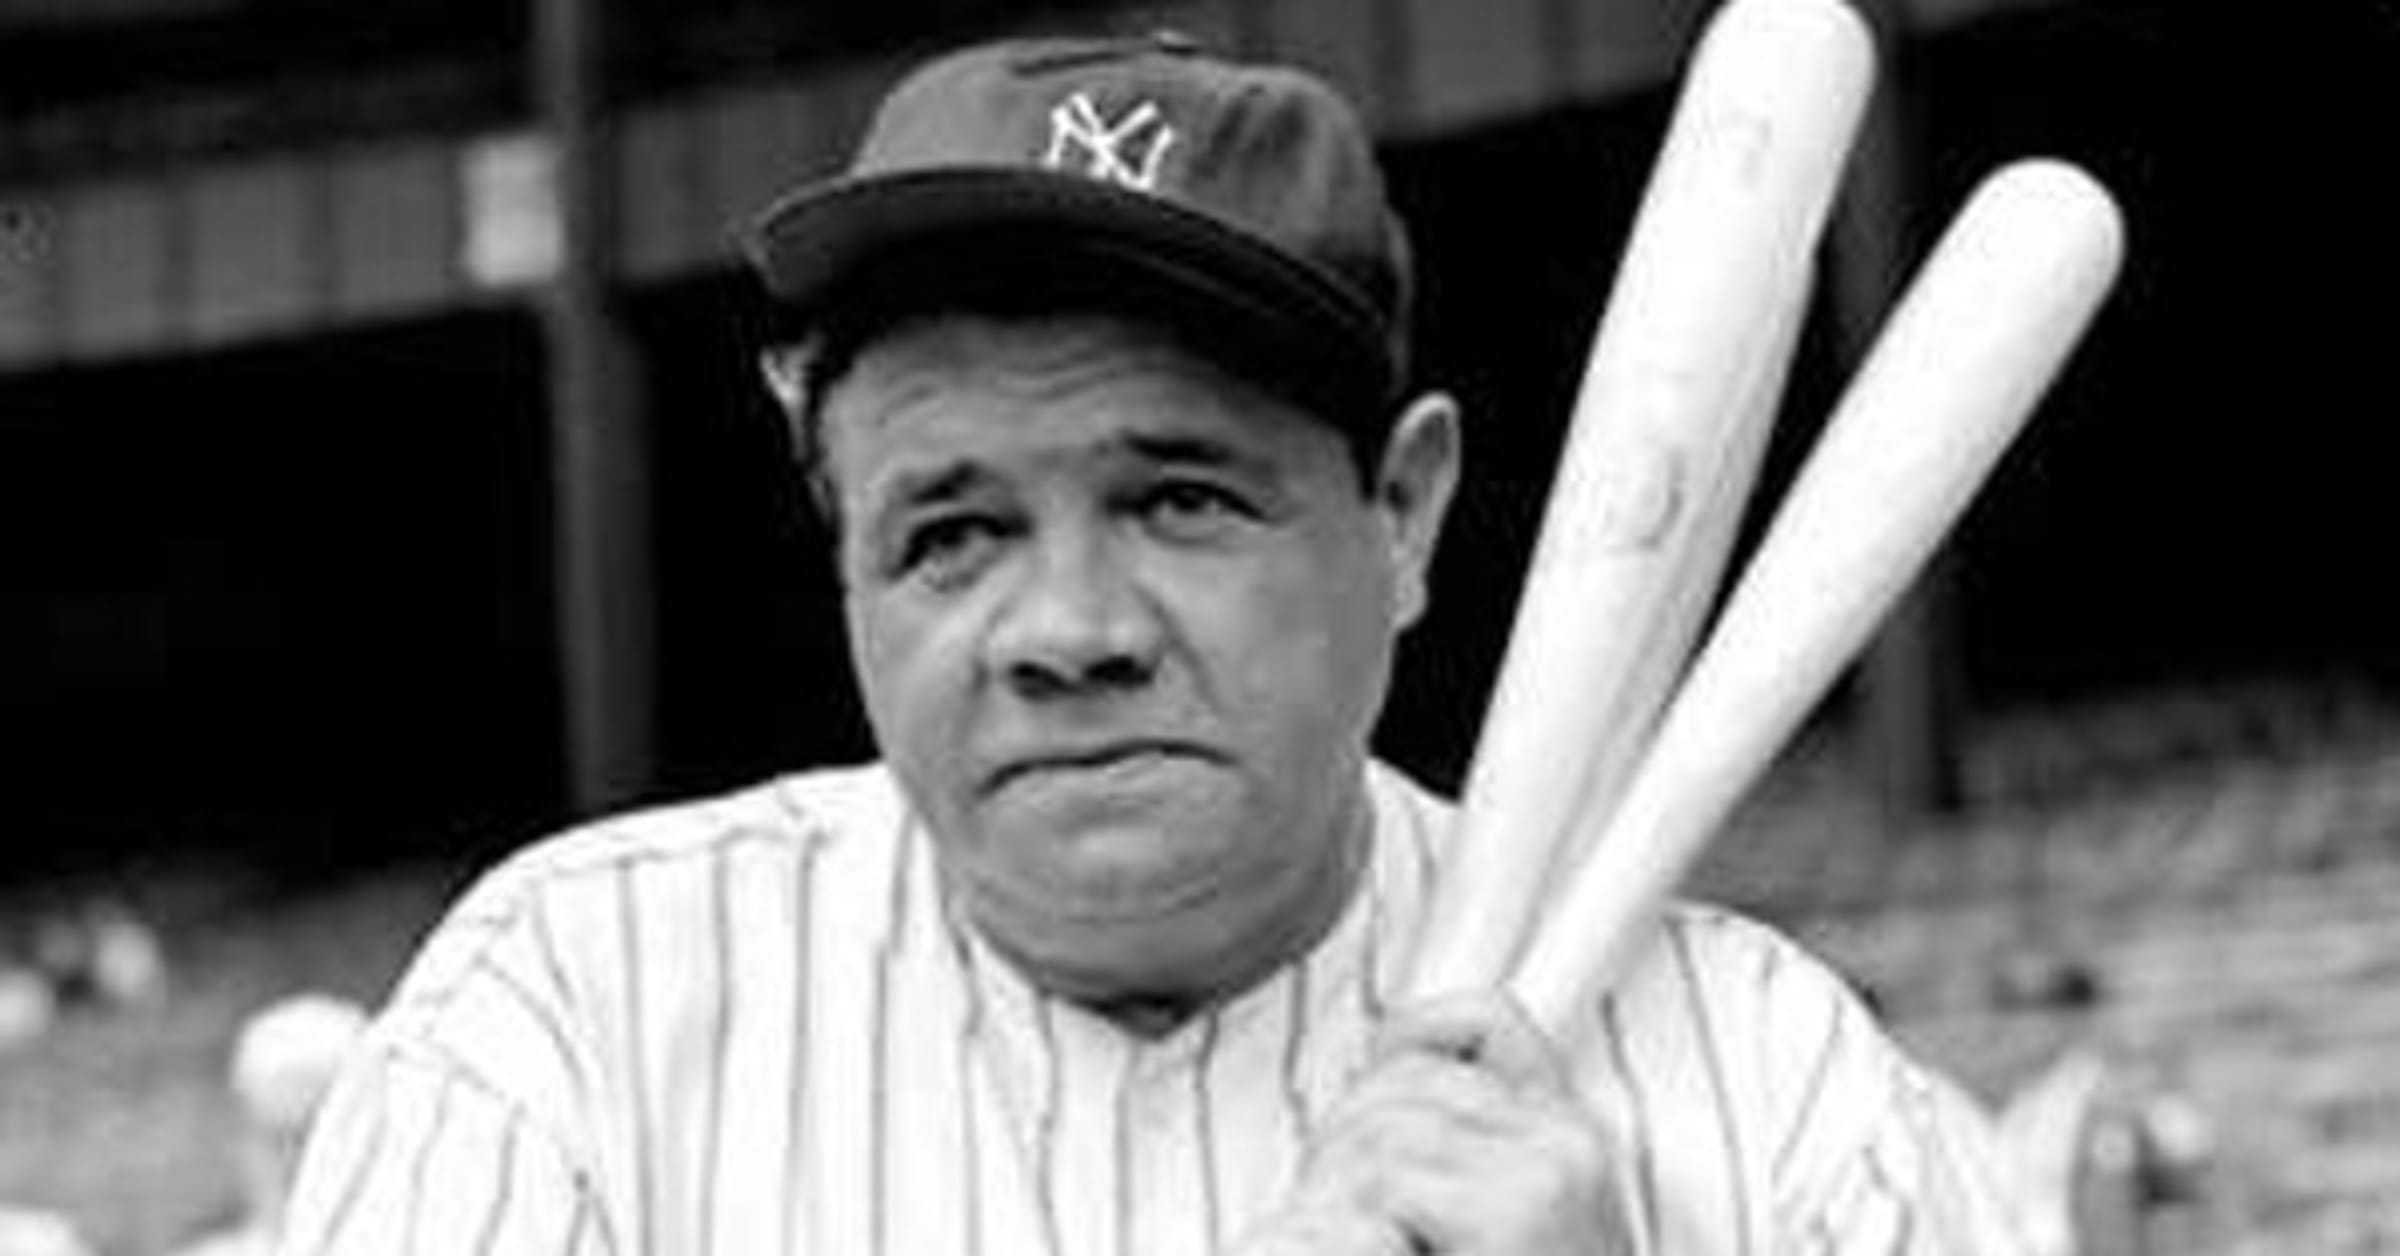 Men's Babe Ruth White New York Yankees Big & Tall Home Cooperstown